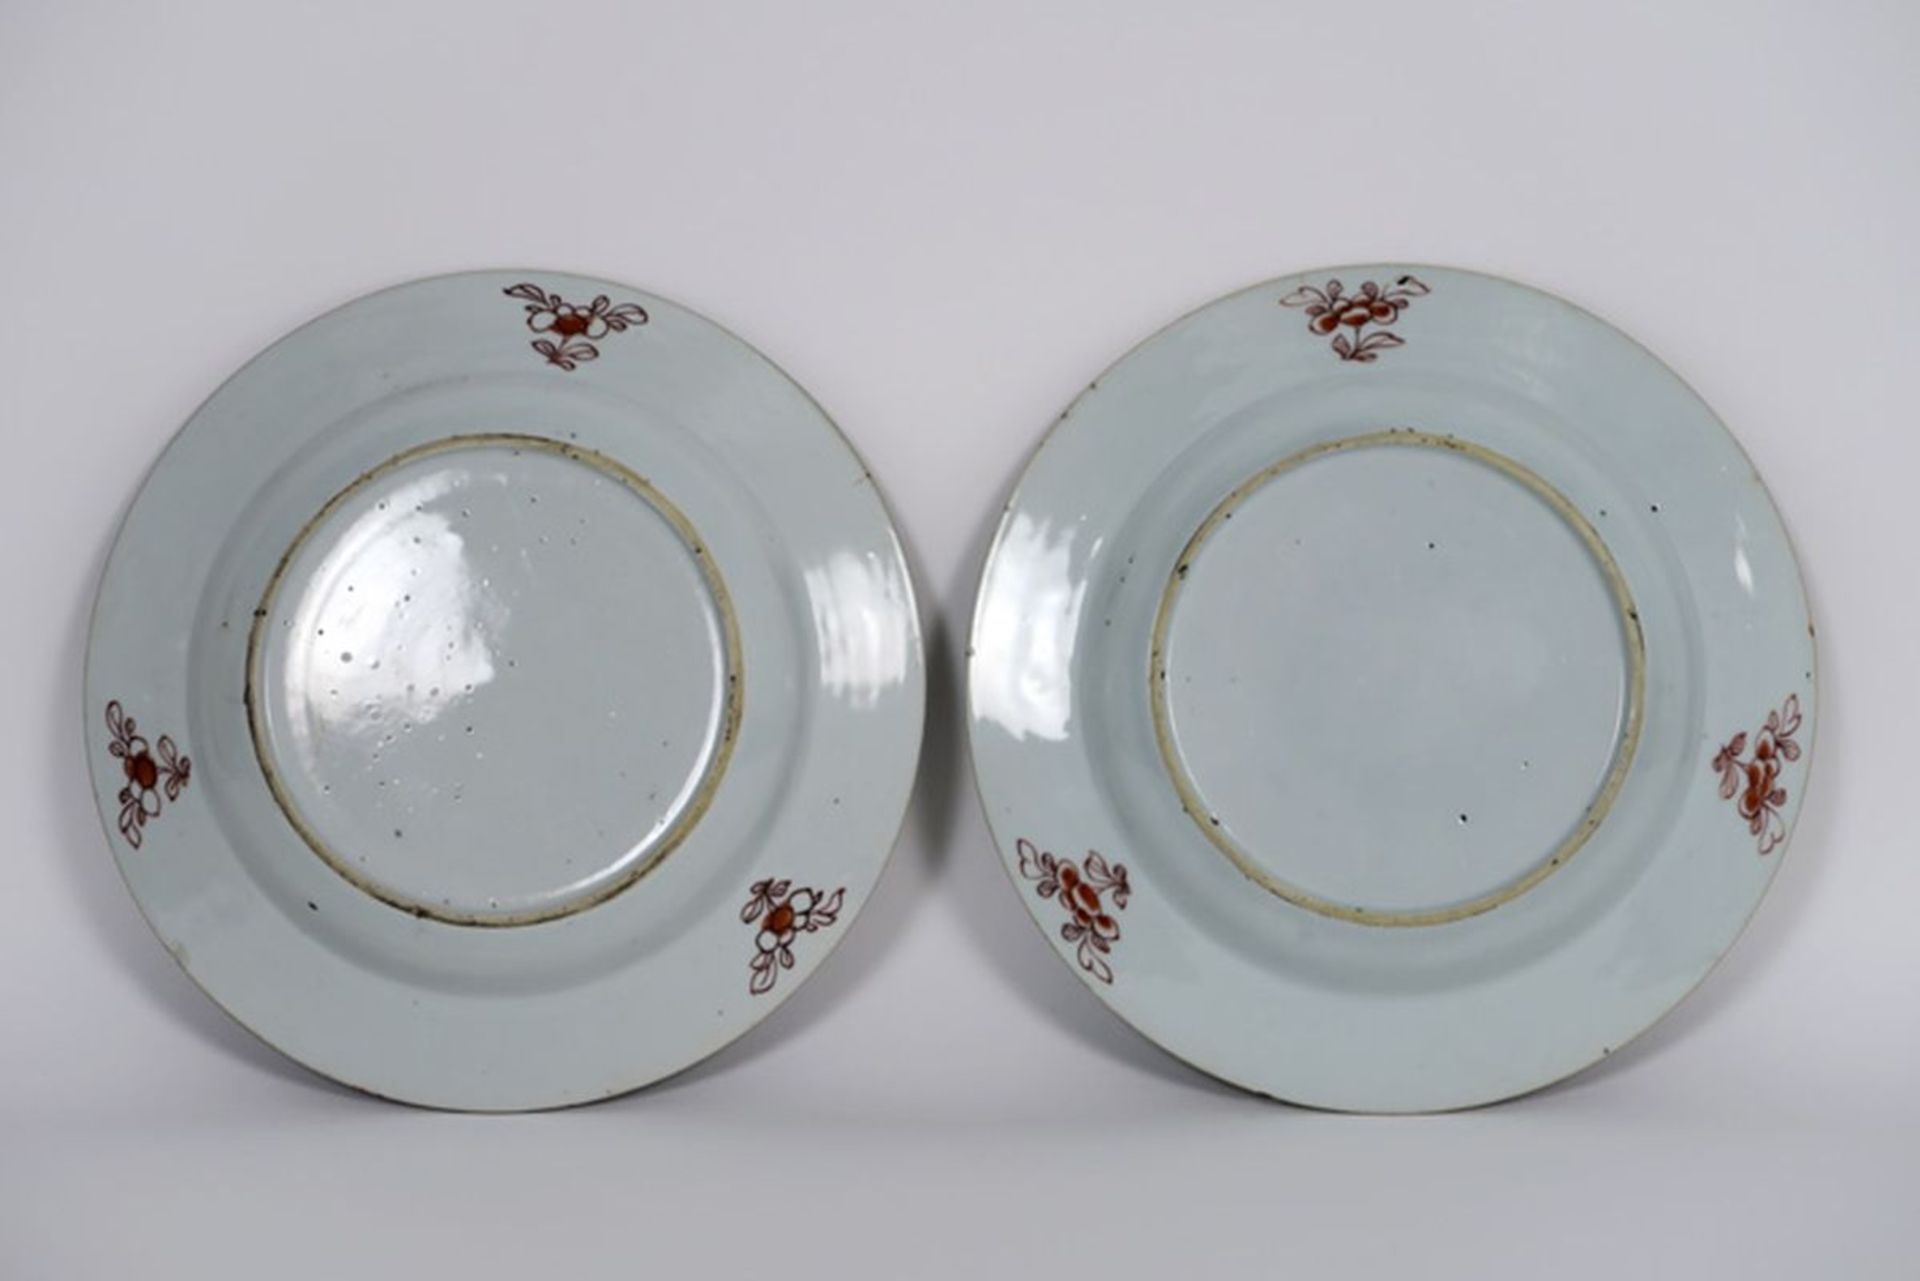 pair of 18th Cent. Chinese plates in porcelain with Famille Rose decor with flowers [...] - Image 2 of 2